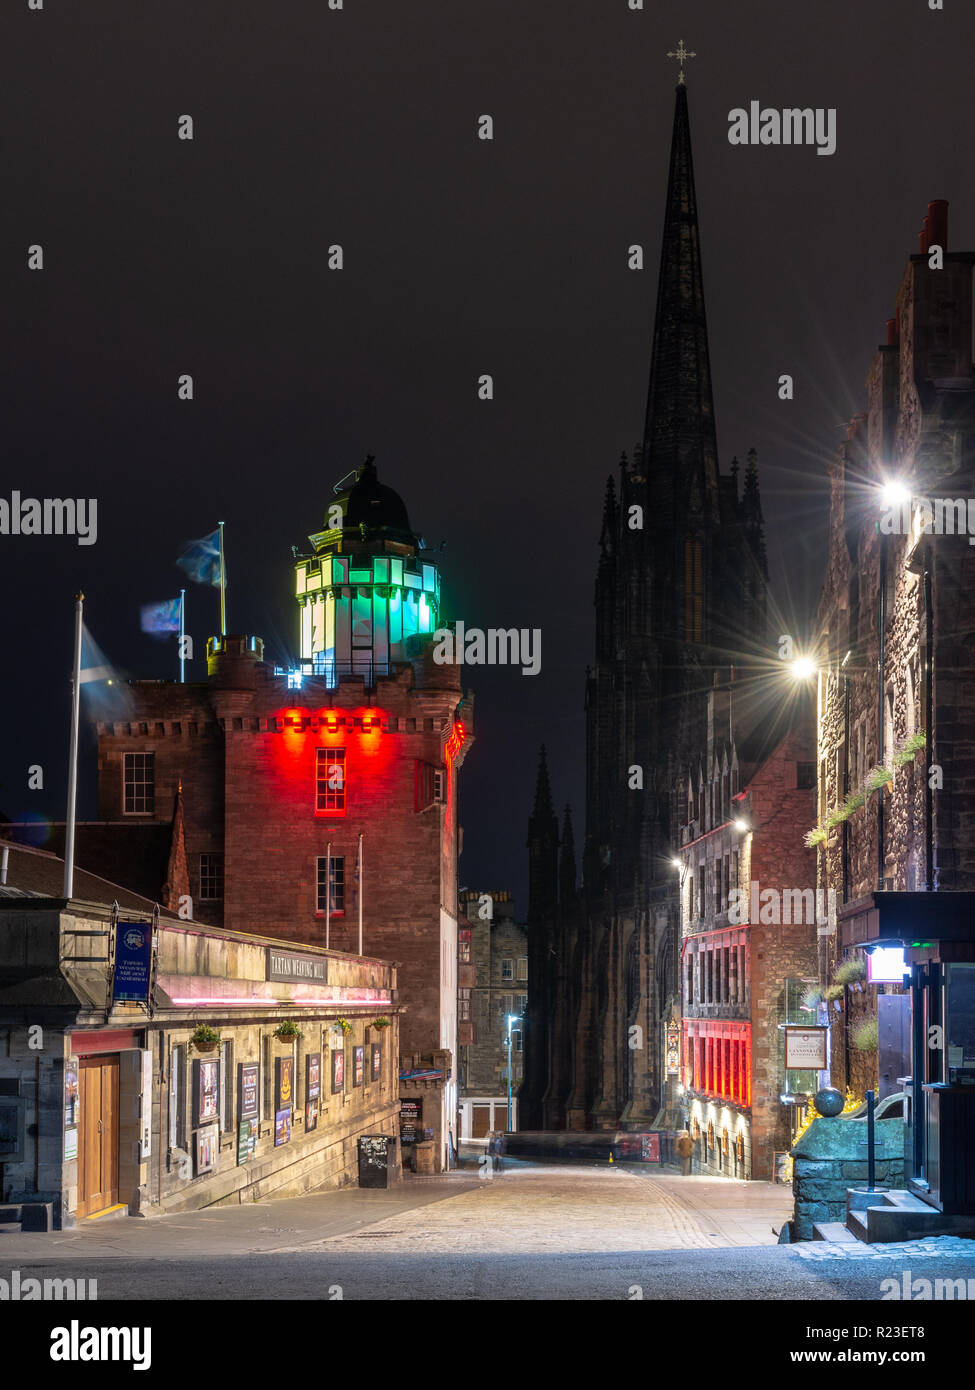 Edinburgh, Scotland, UK - November 2, 2018: The Camera Obscura building is lit at night opposite Tolbooth Kirk on Castle Hill at the head of the Royal Stock Photo